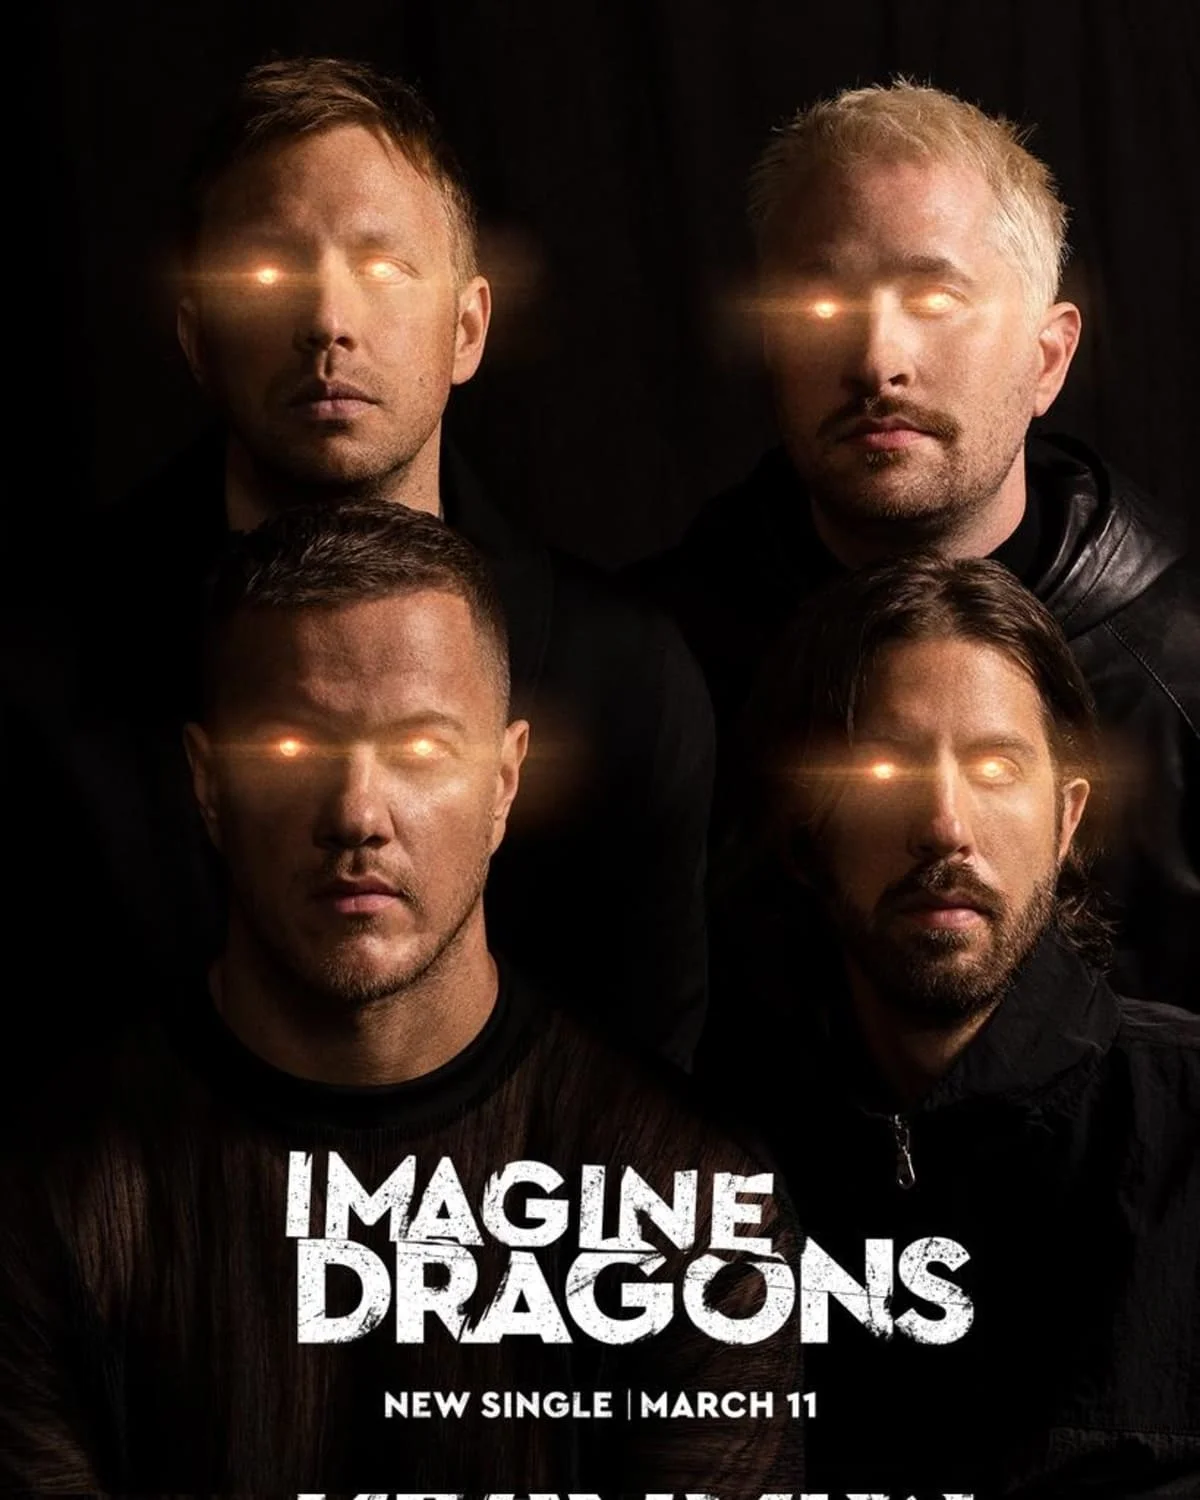 Imagine Dragons released a new single for the third season of 